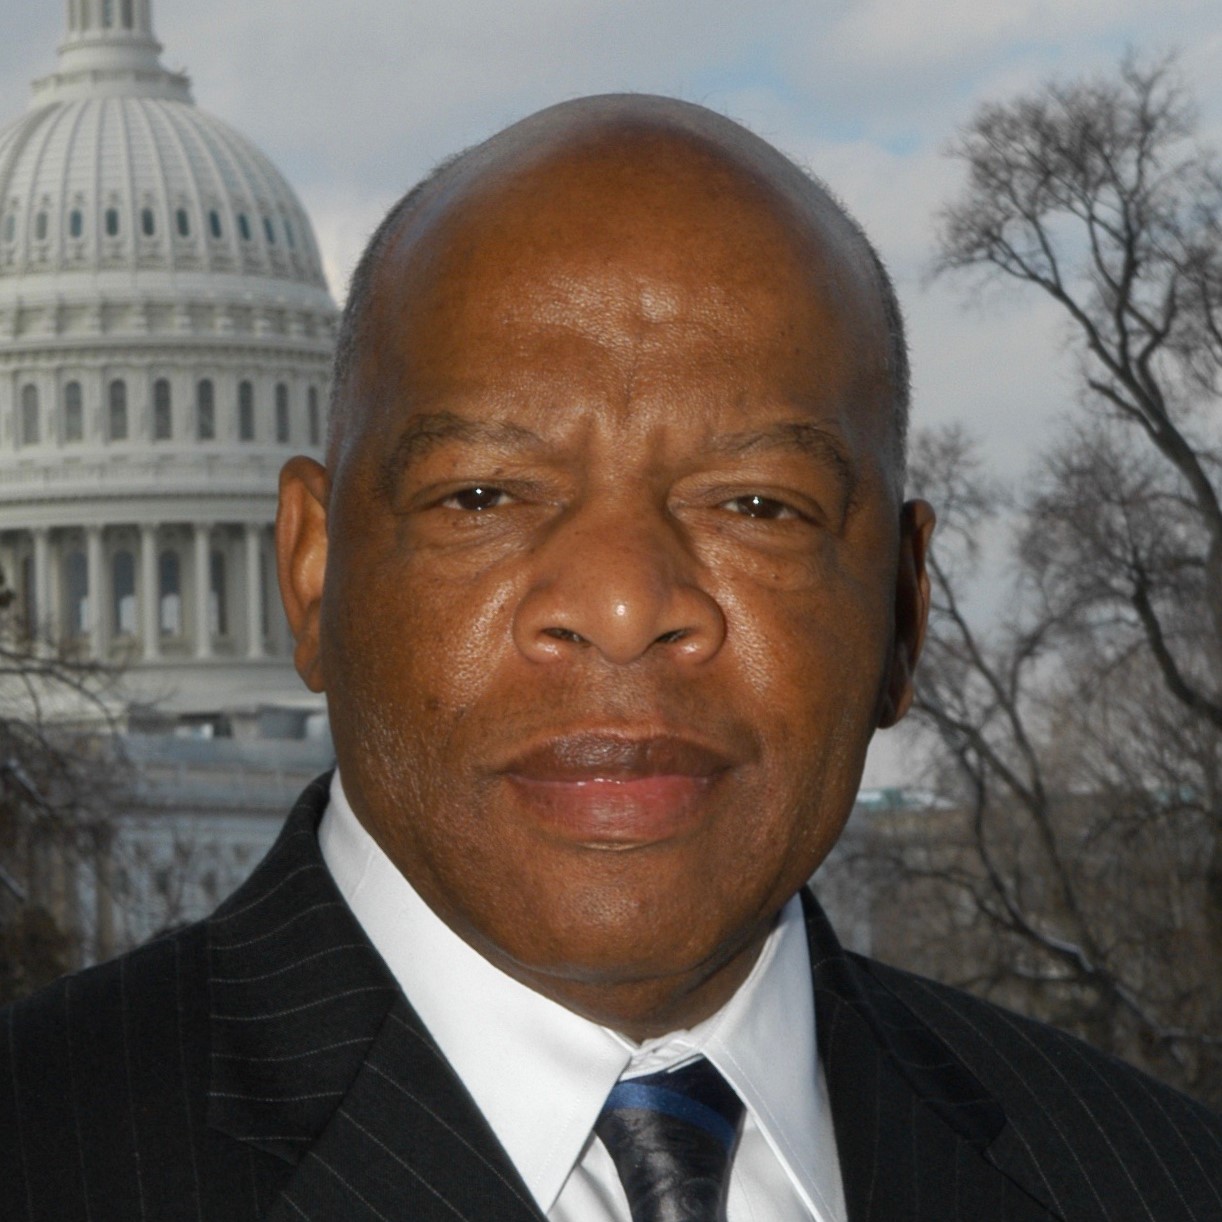 Civil-rights icon and long-time Georgia Congressman John Lewis dead at 80